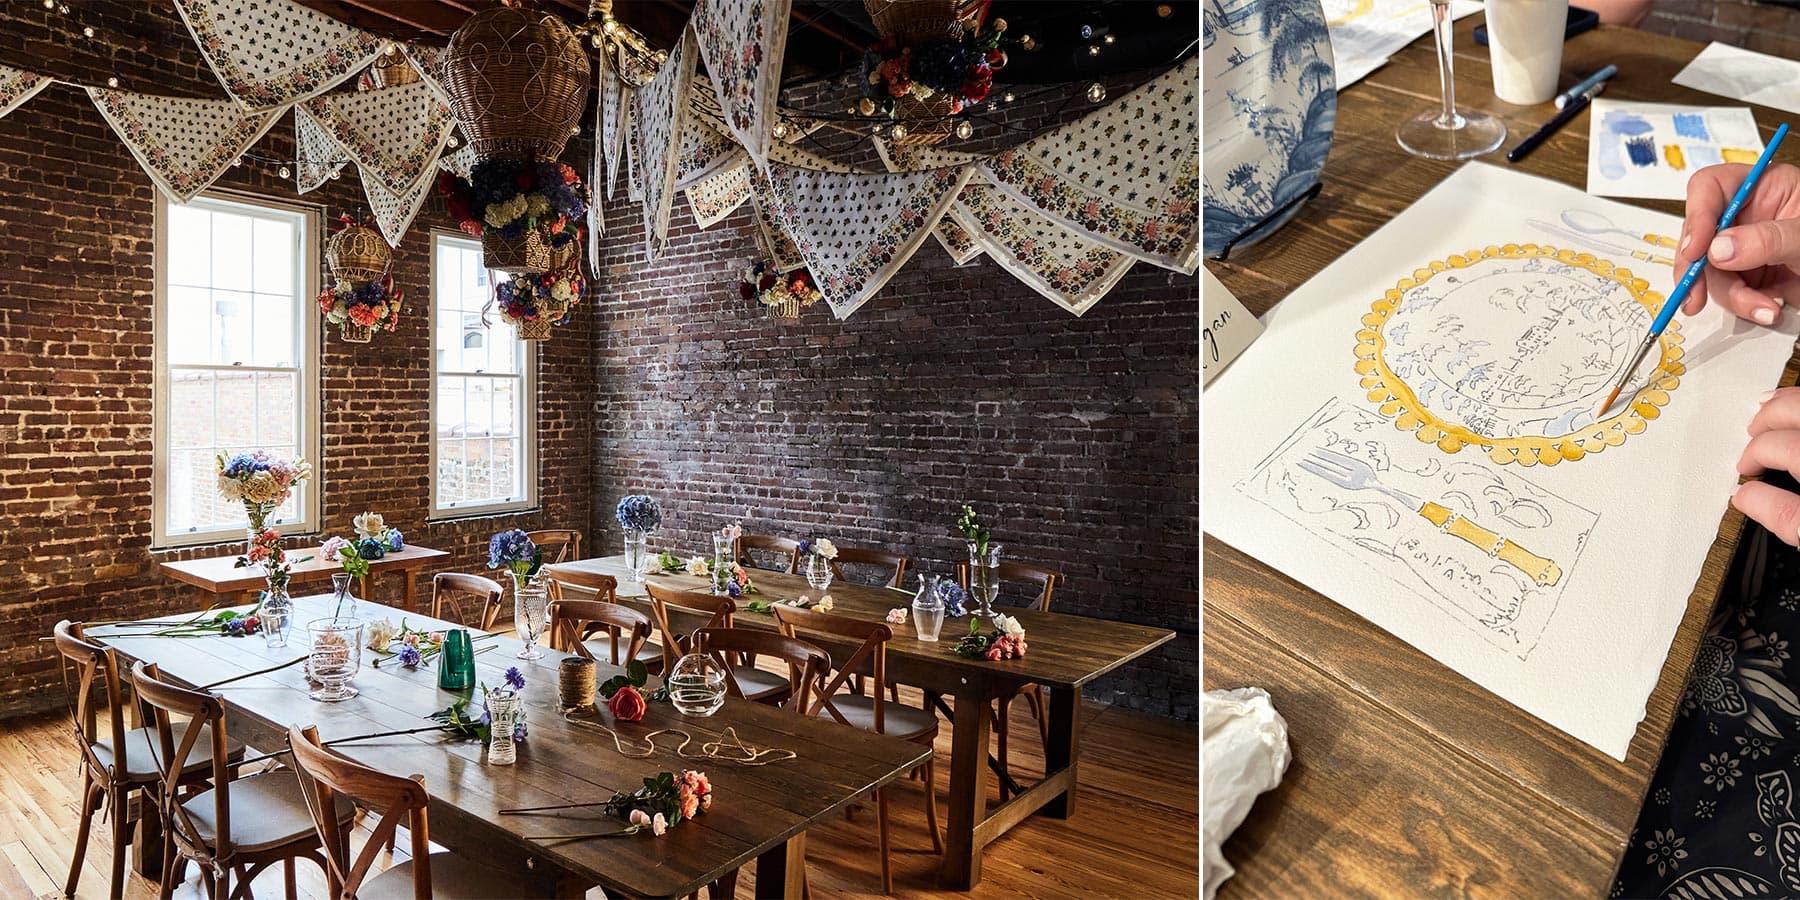 Workshops dedicated to the art of living well from floral arranging to watercolor painting in our Charleston Flagship.